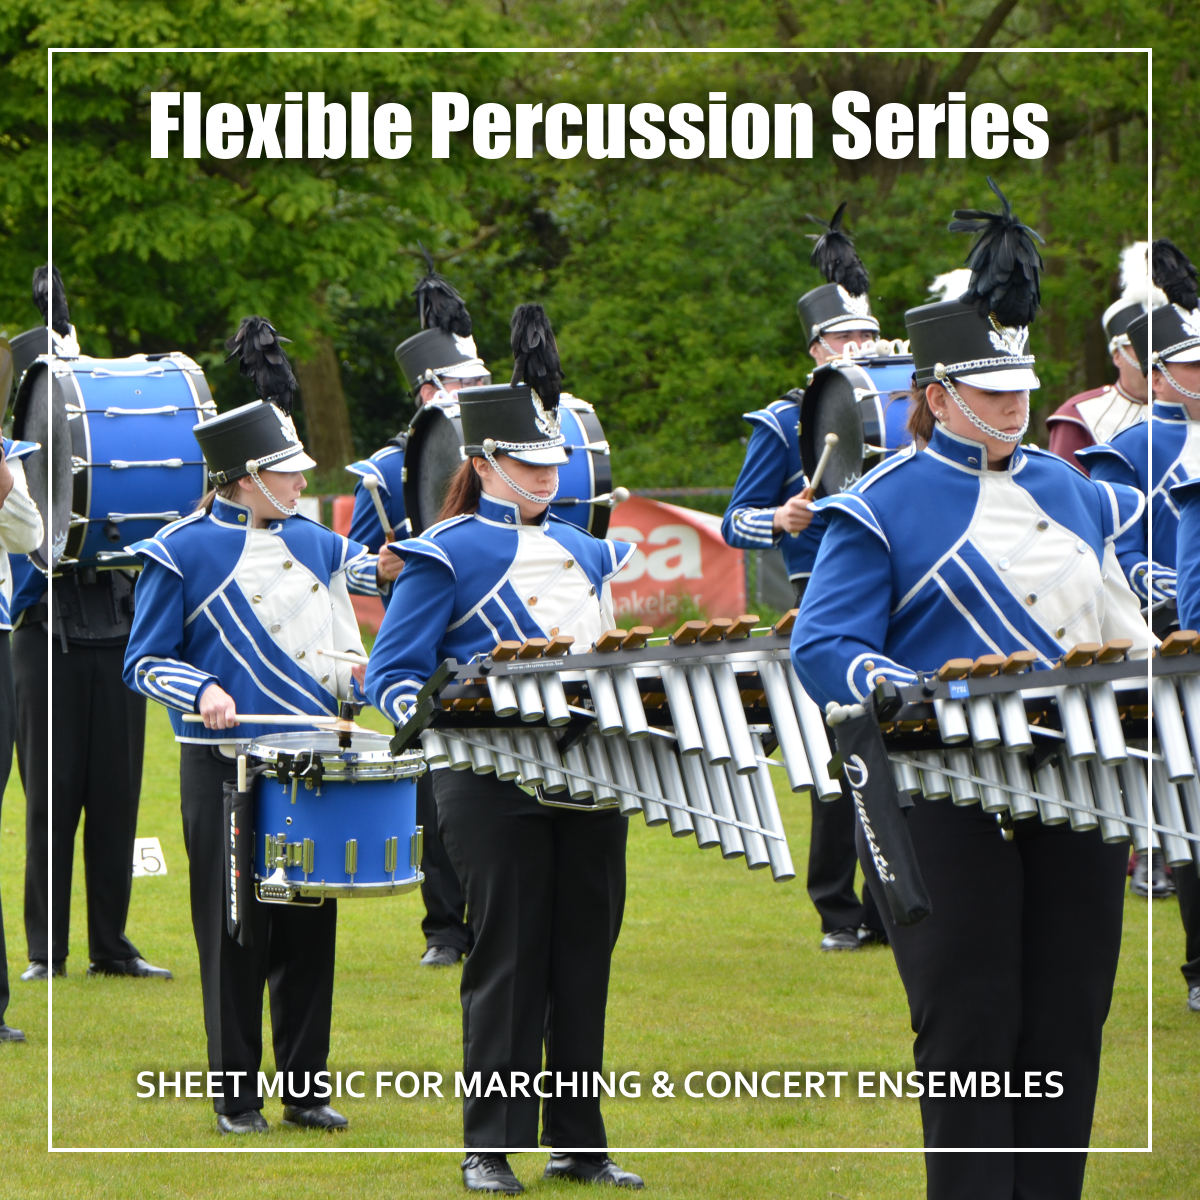 Flexible Percussion Series | Sheet Music For Marching & Concert Ensembles